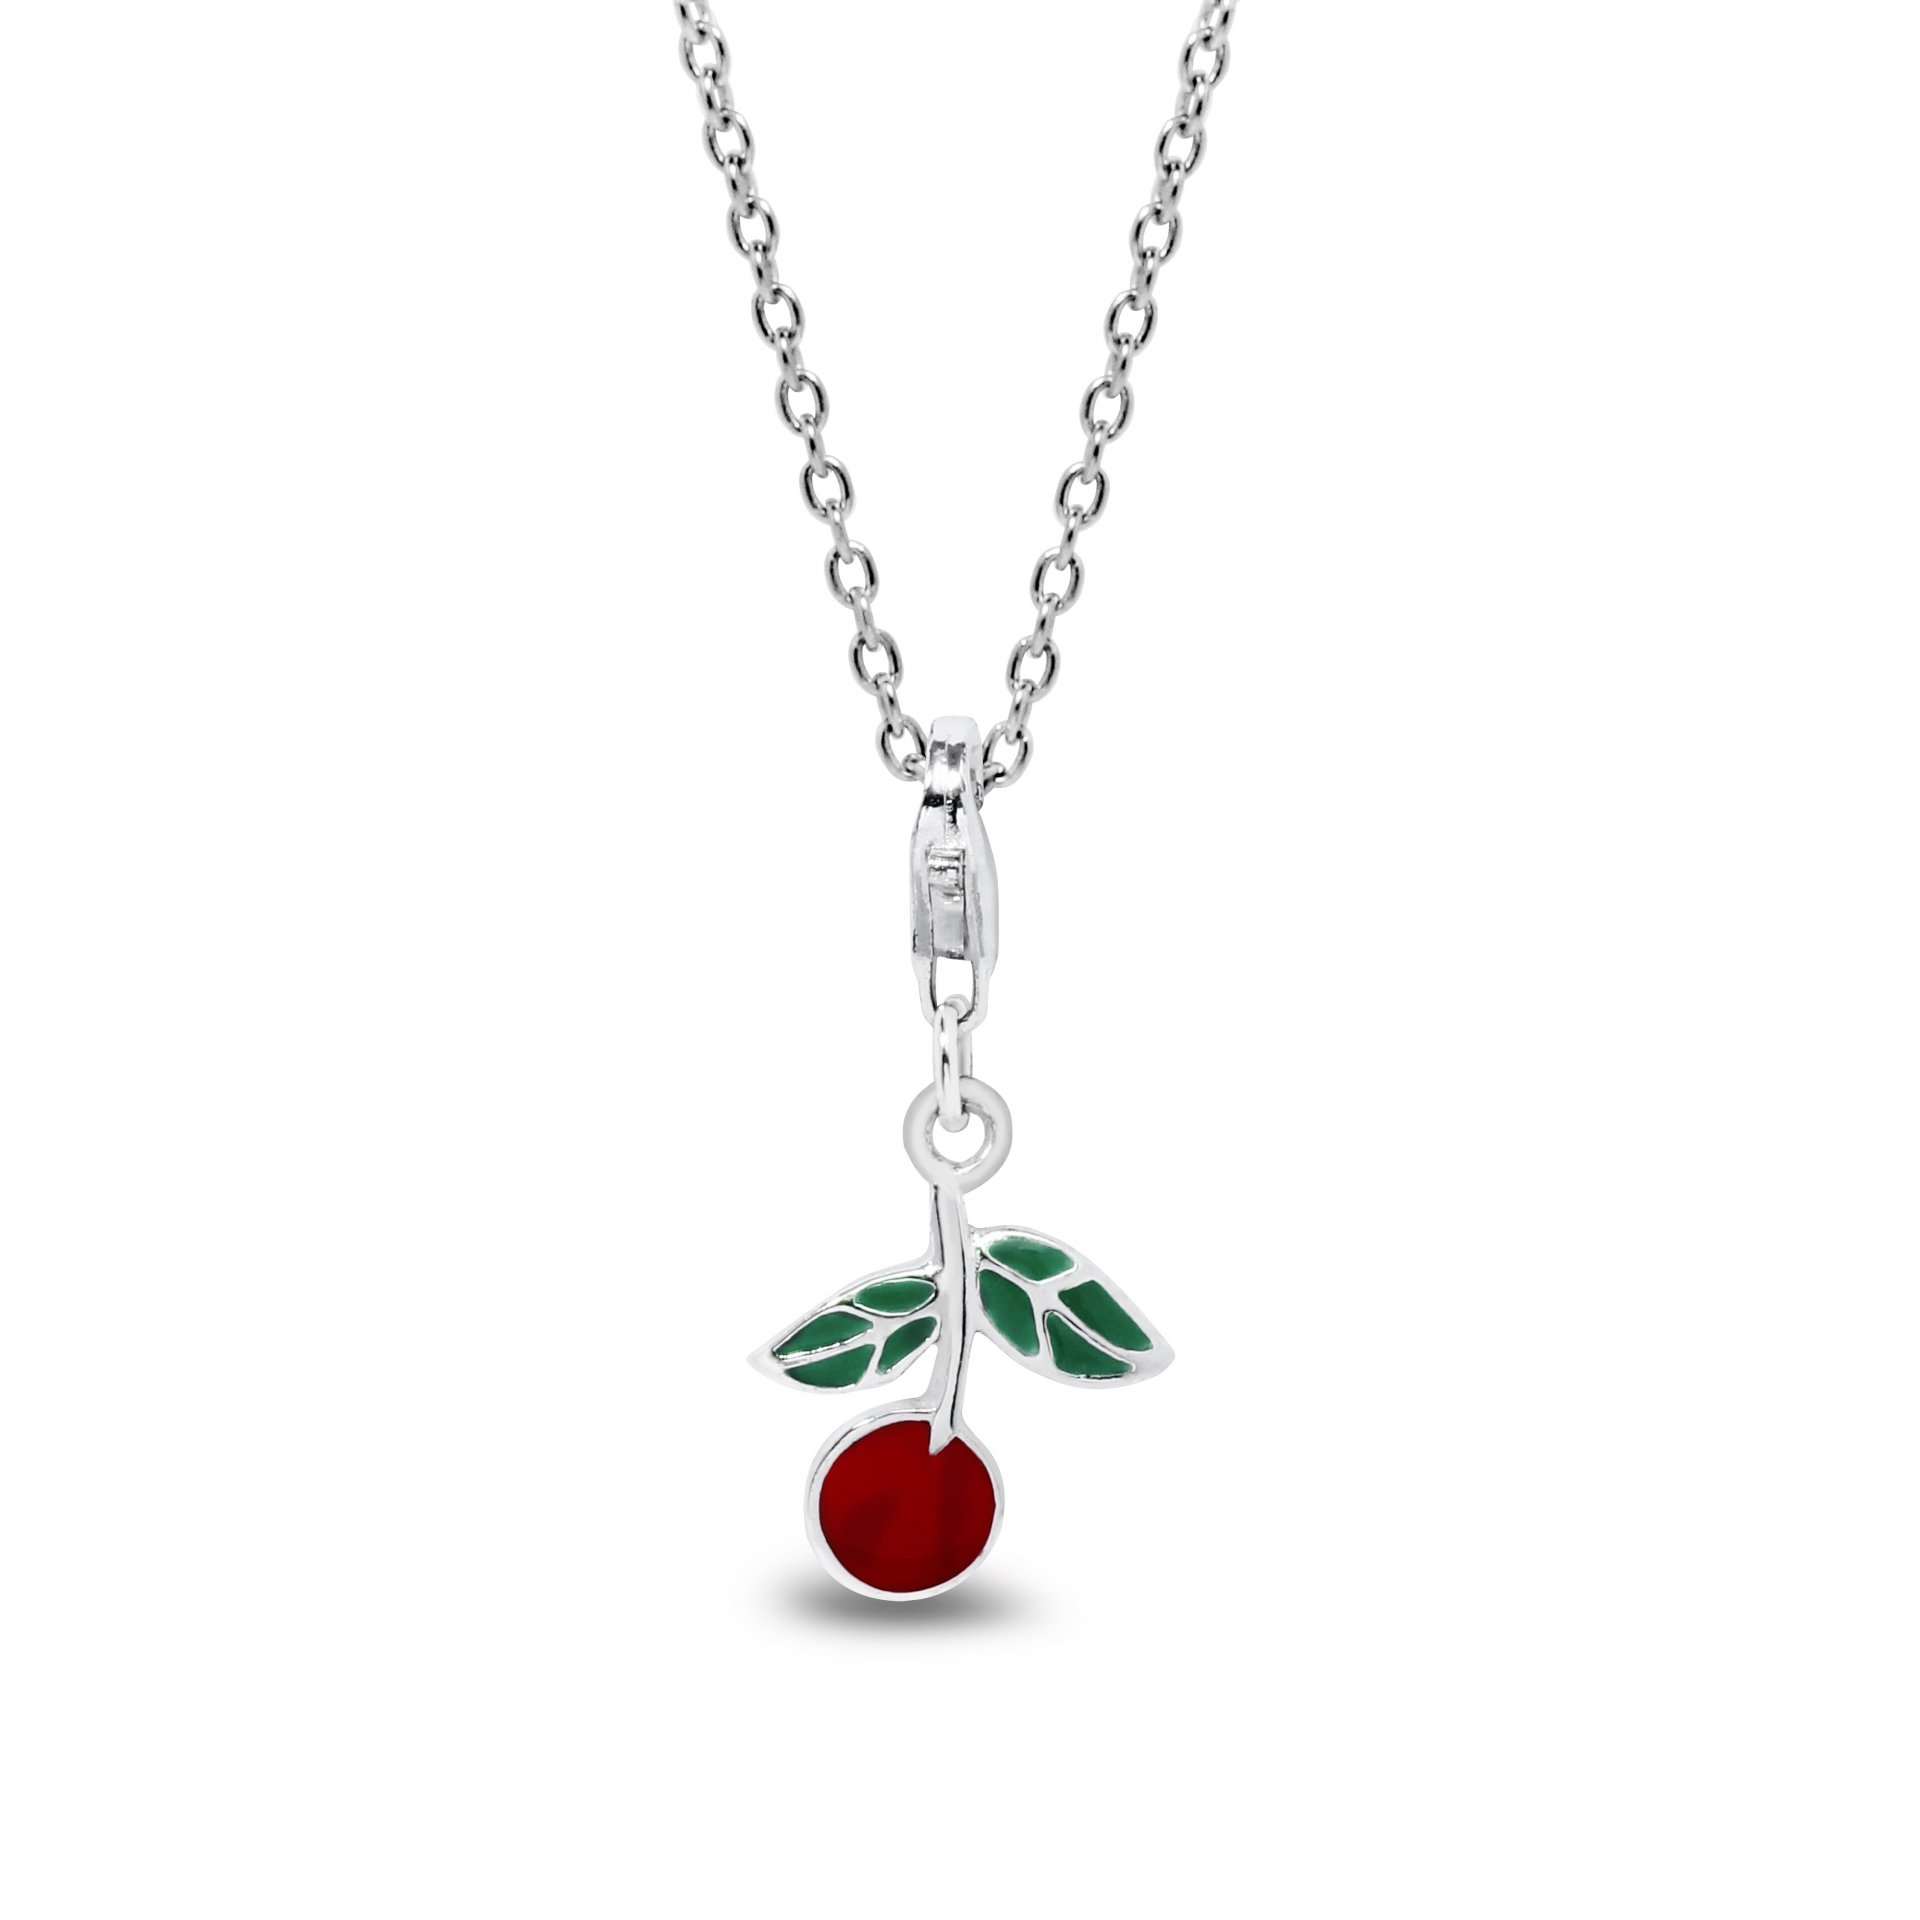 Sterling Silver 'Cherry' Pendant